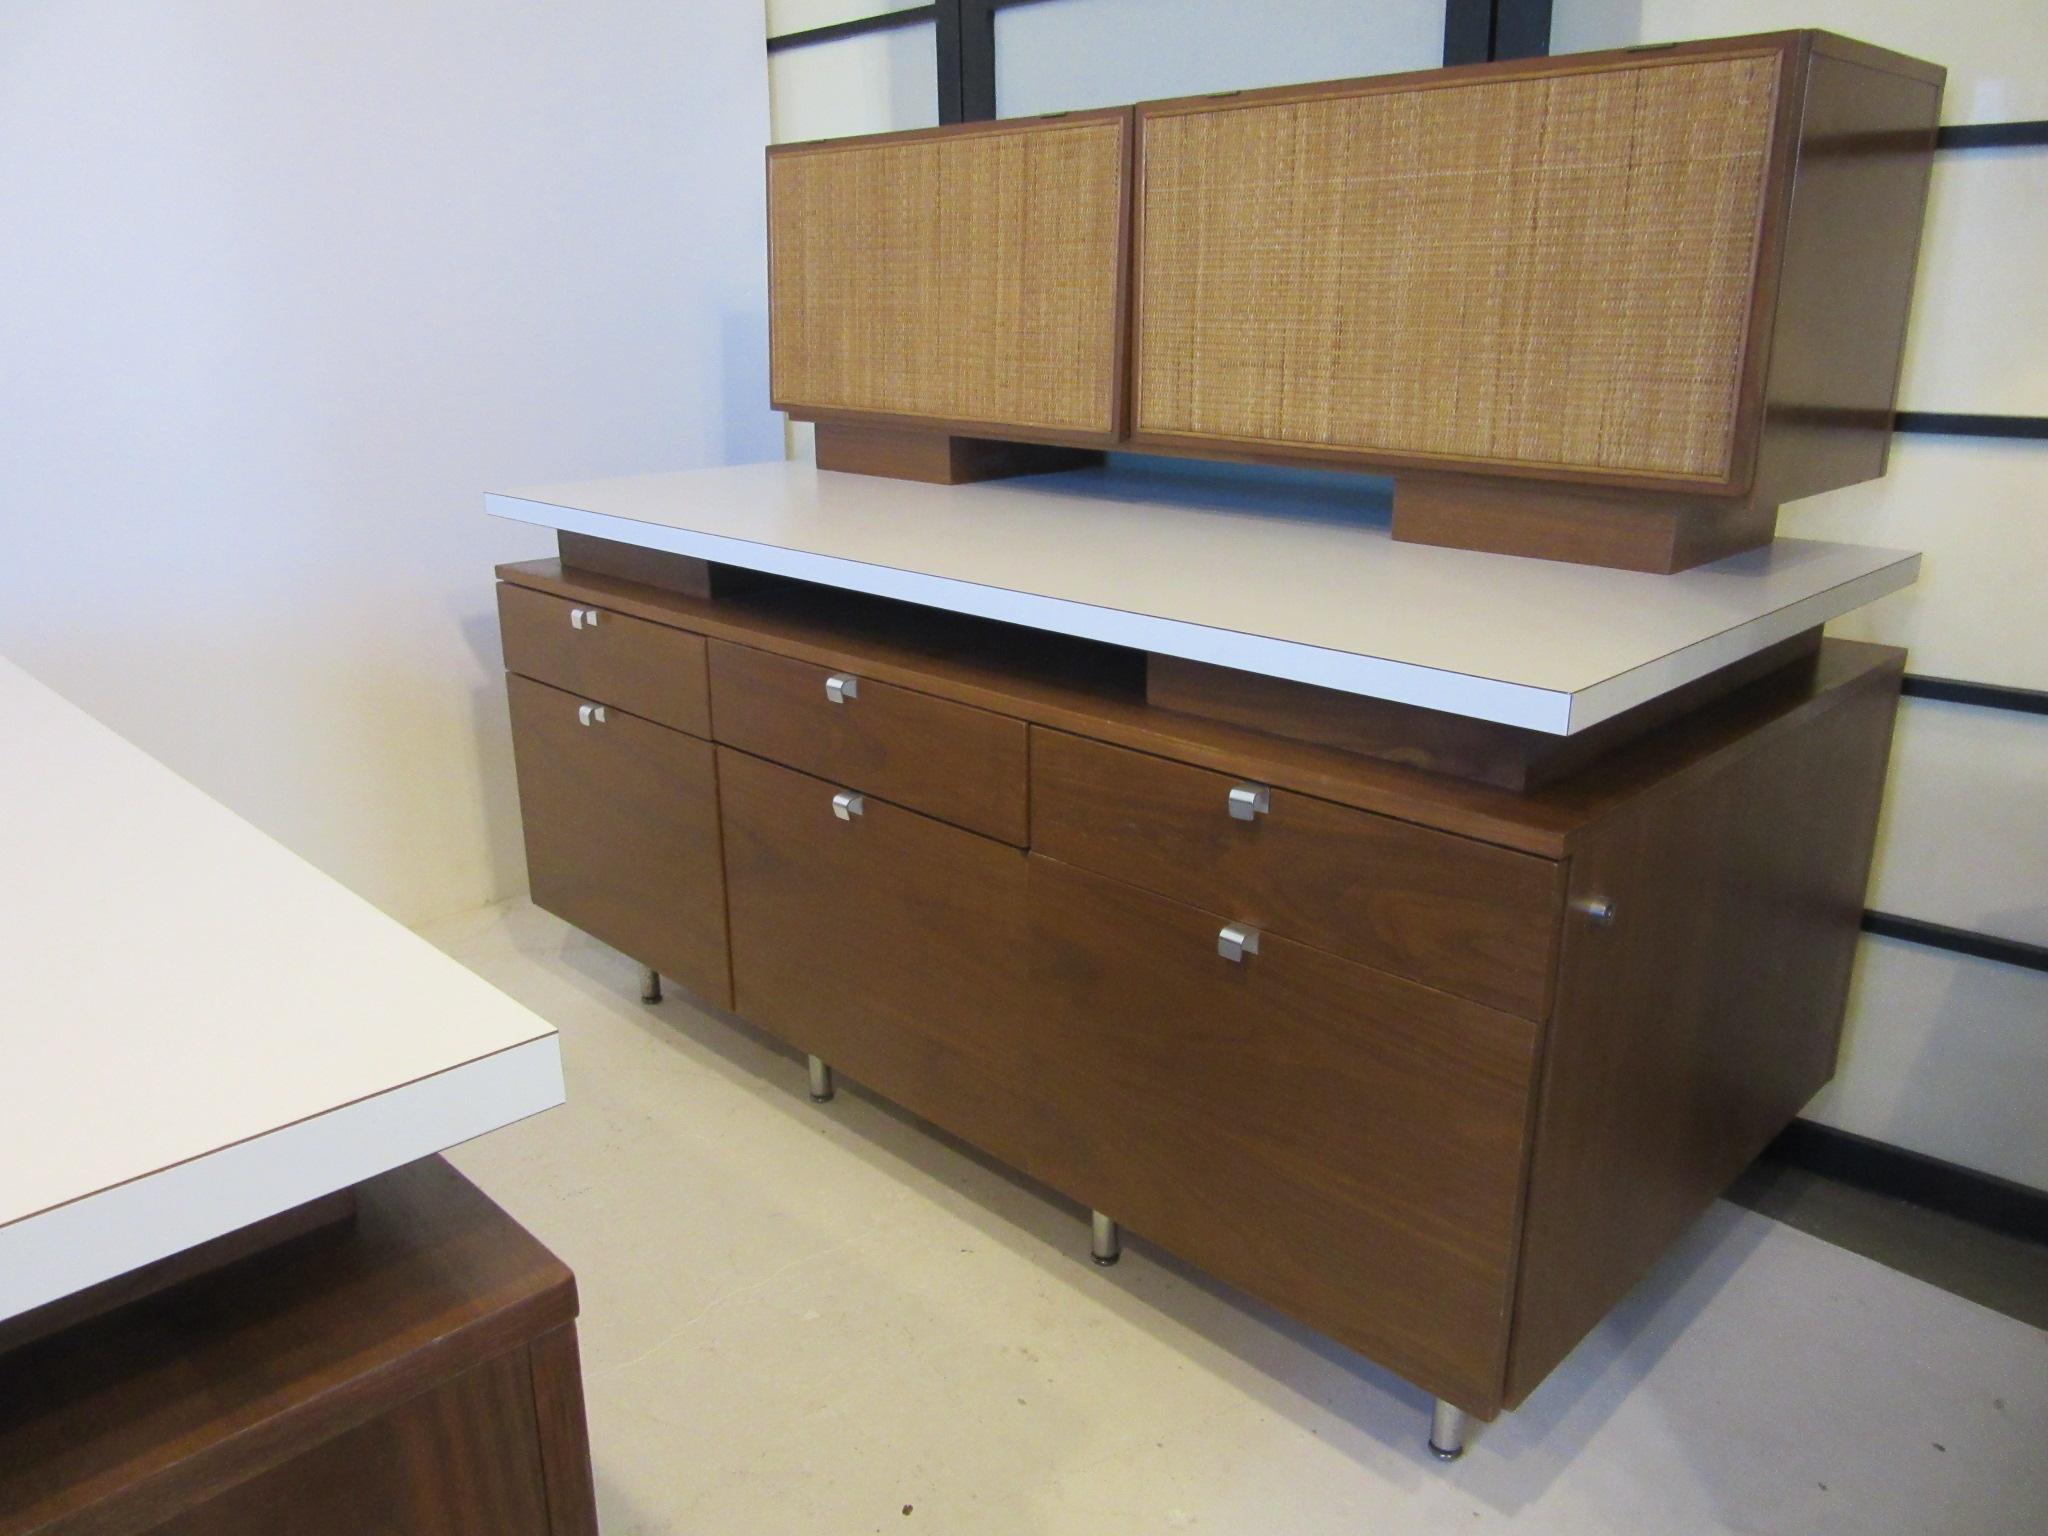 A rare Nelson walnut office styled hutch with work surface, two upper storage bins with caned flip up doors and three lower drawers and three lower files drawers. Custom made for the Irwin Union Bank building in Columbus Indiana which was designed